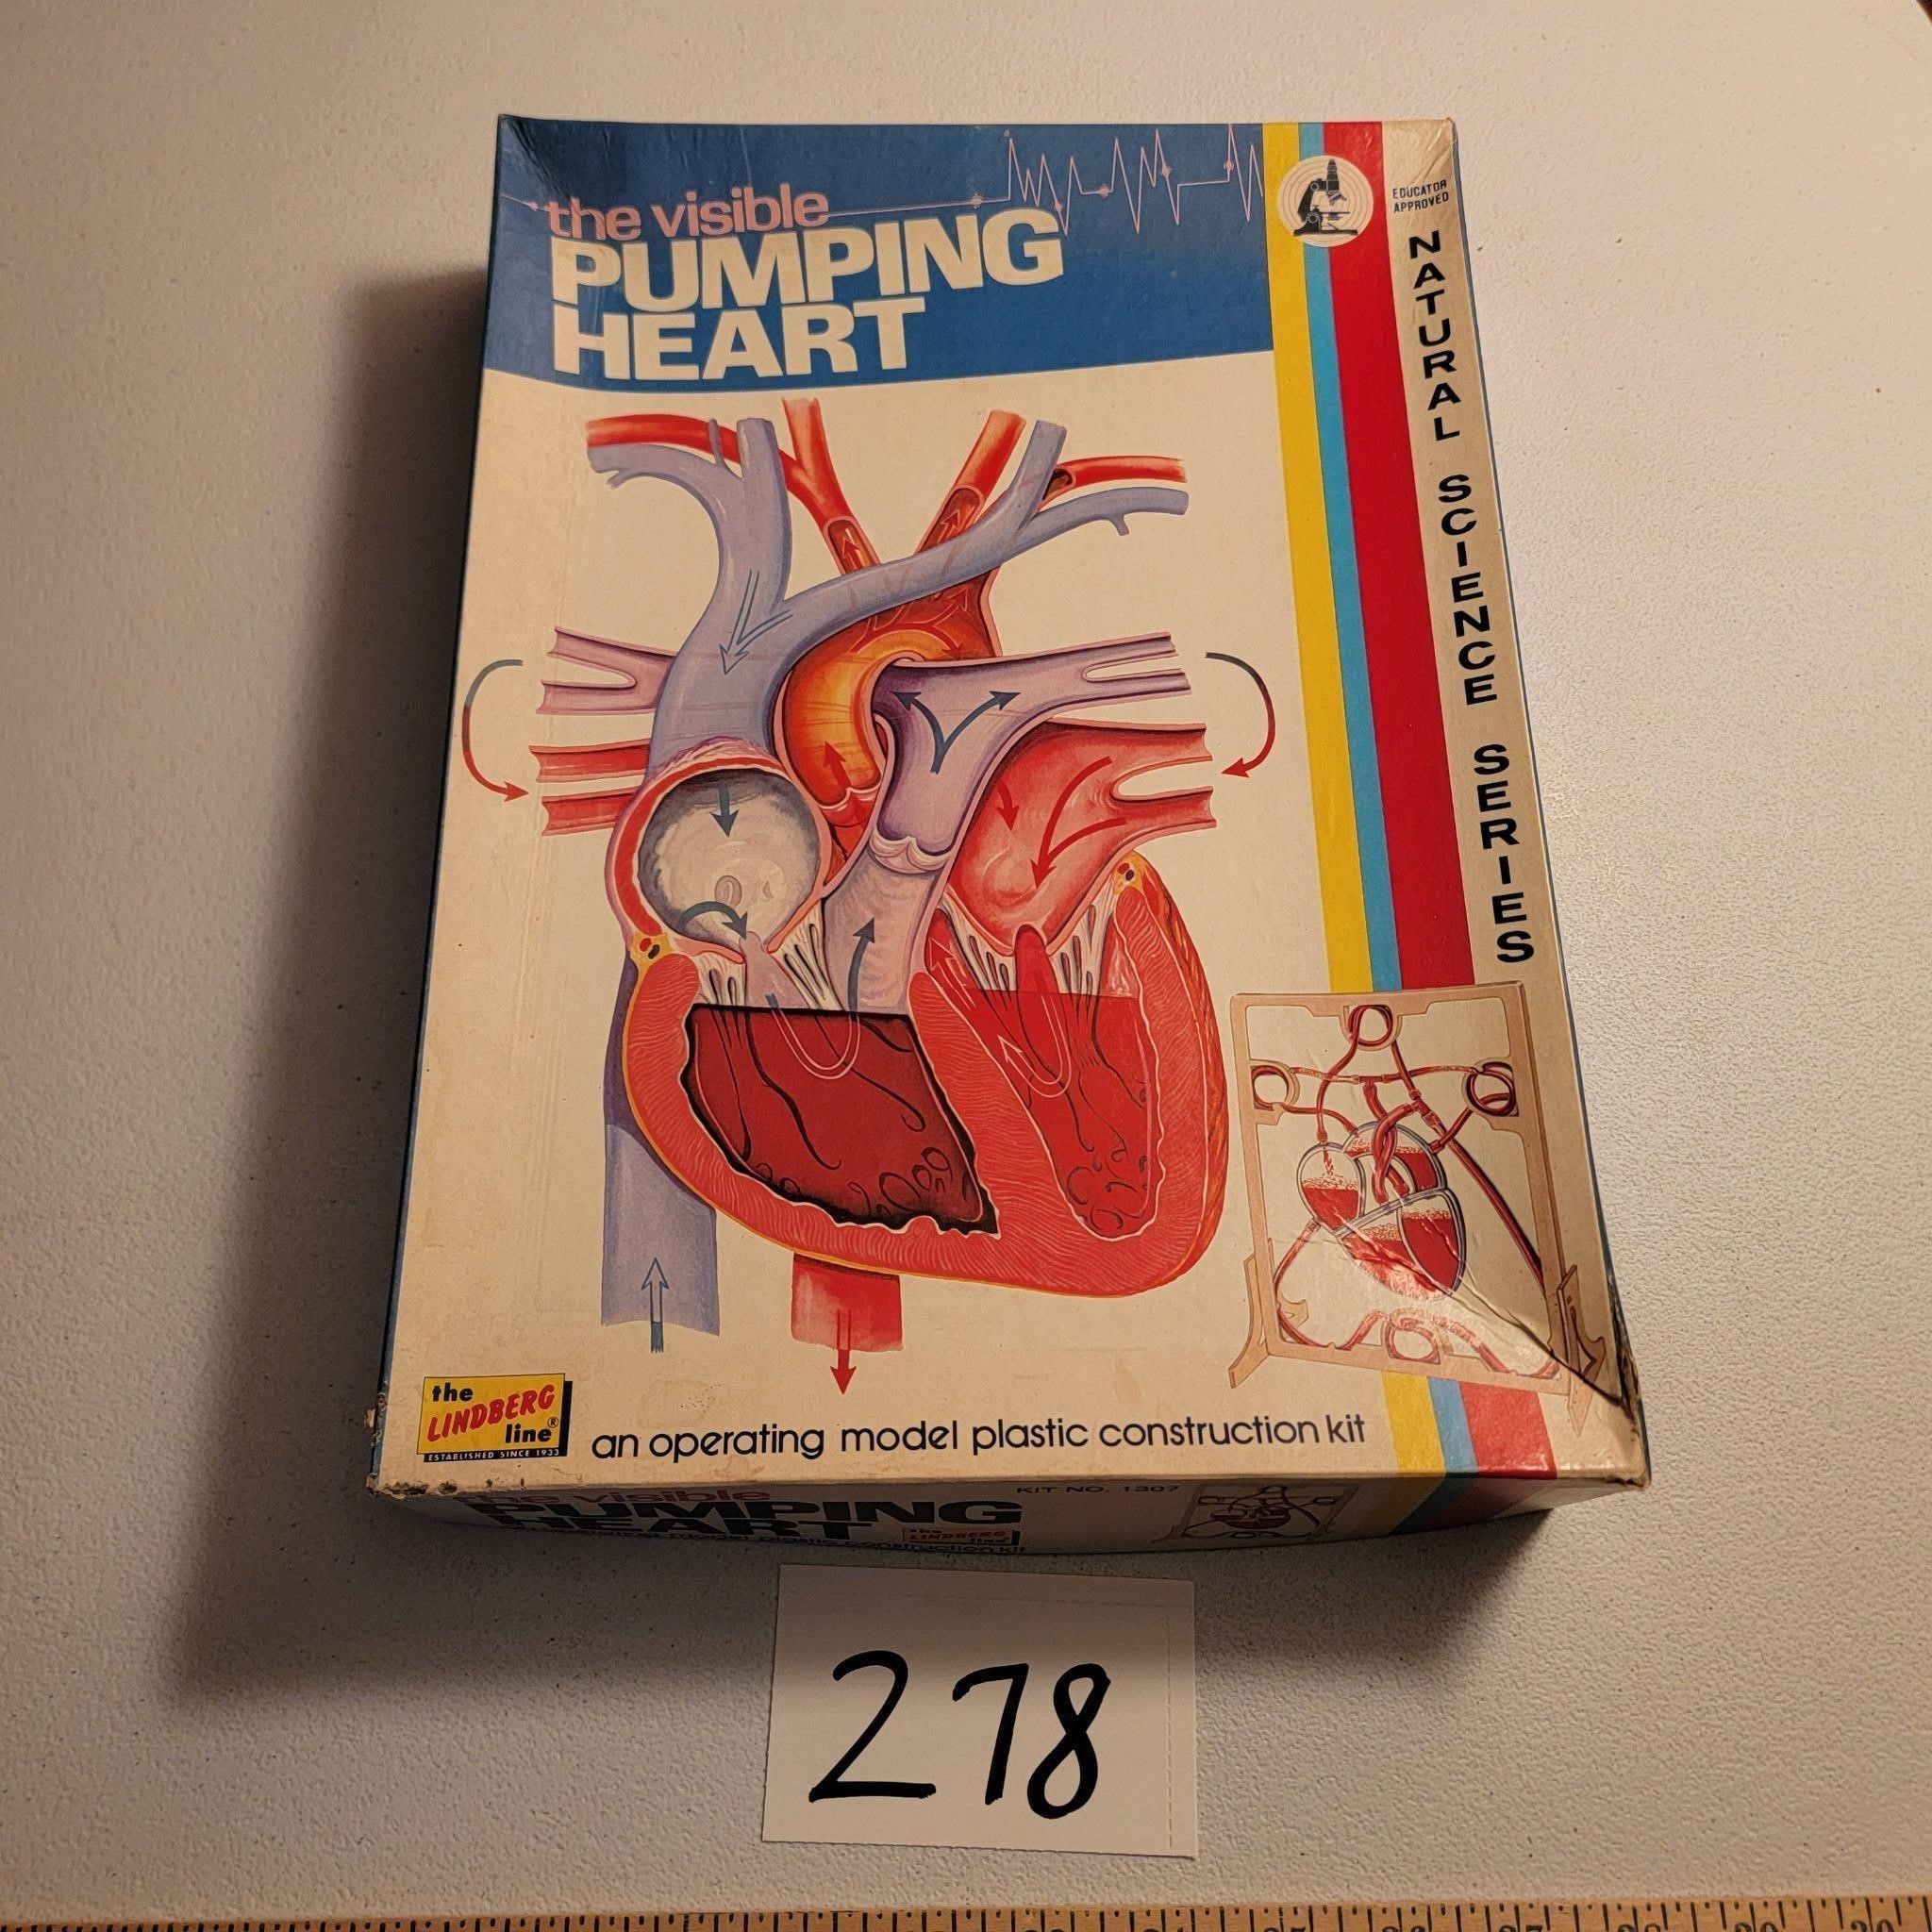 The Visible Pumping Heart